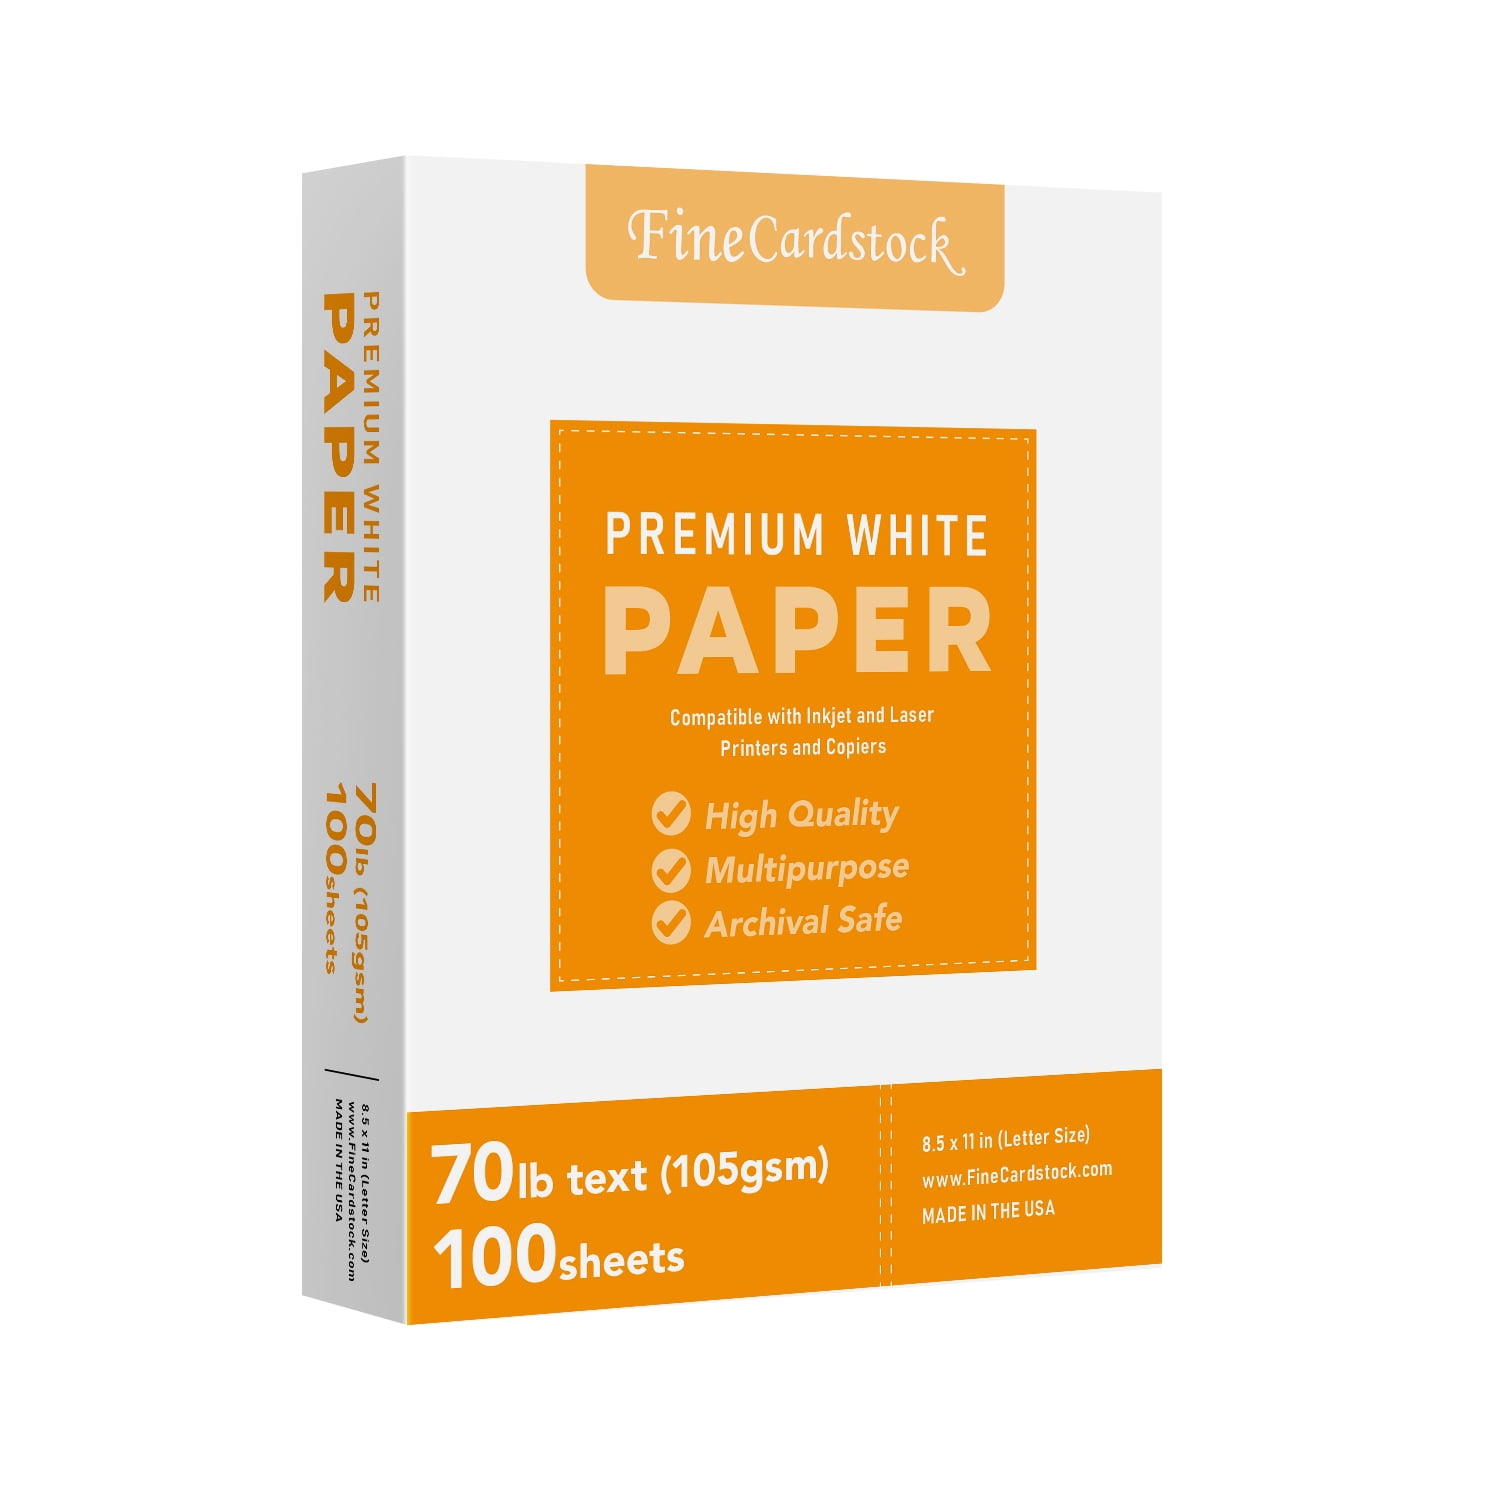 A4 Size Premium Printer Paper - Great for Printing Professional